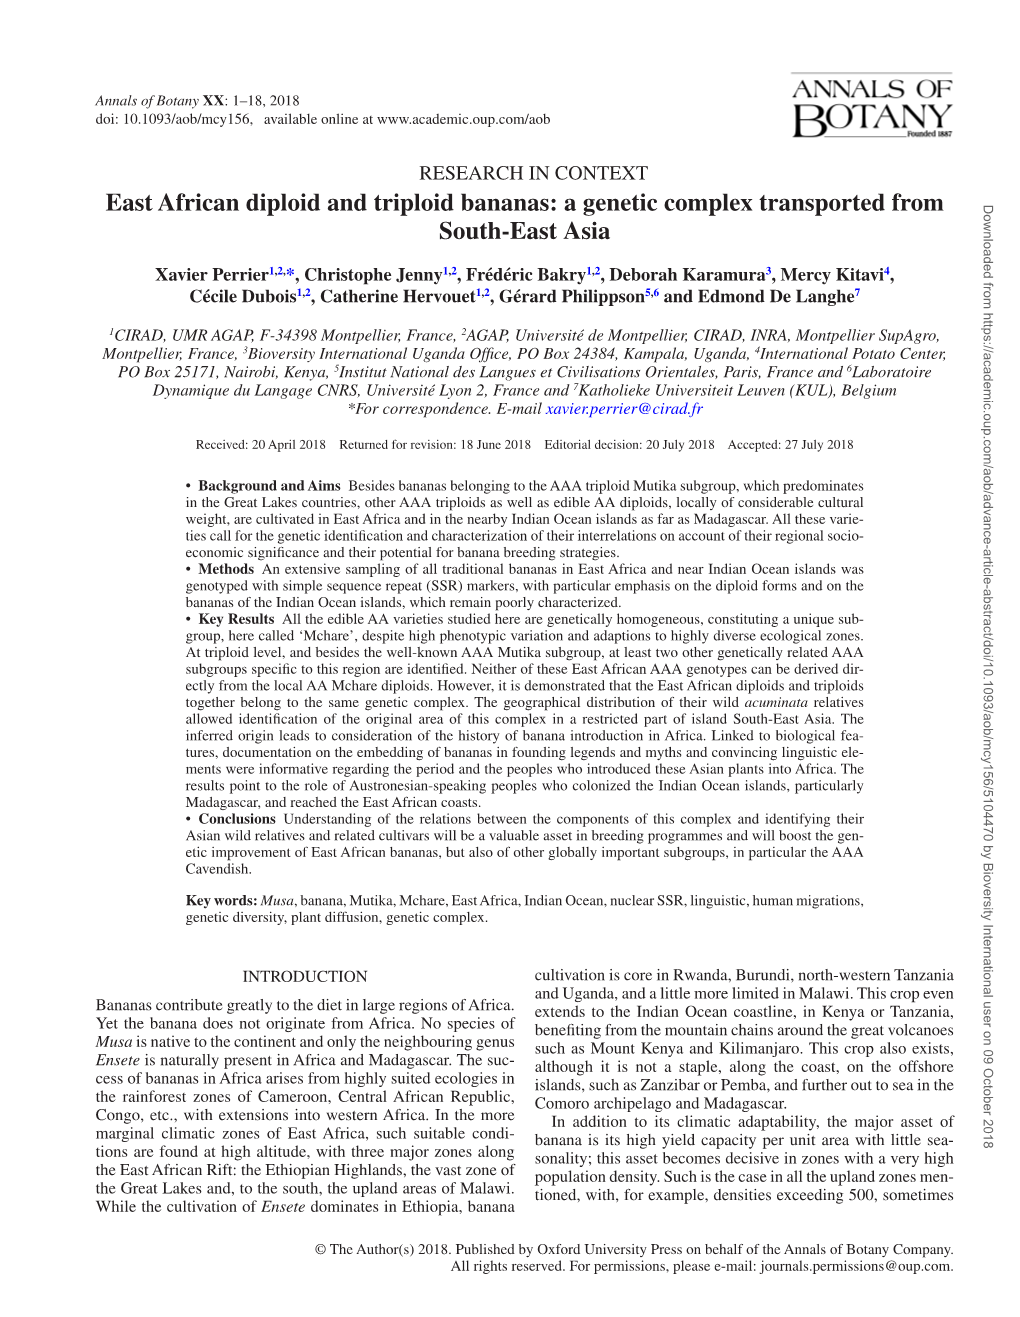 East African Diploid and Triploid Bananas